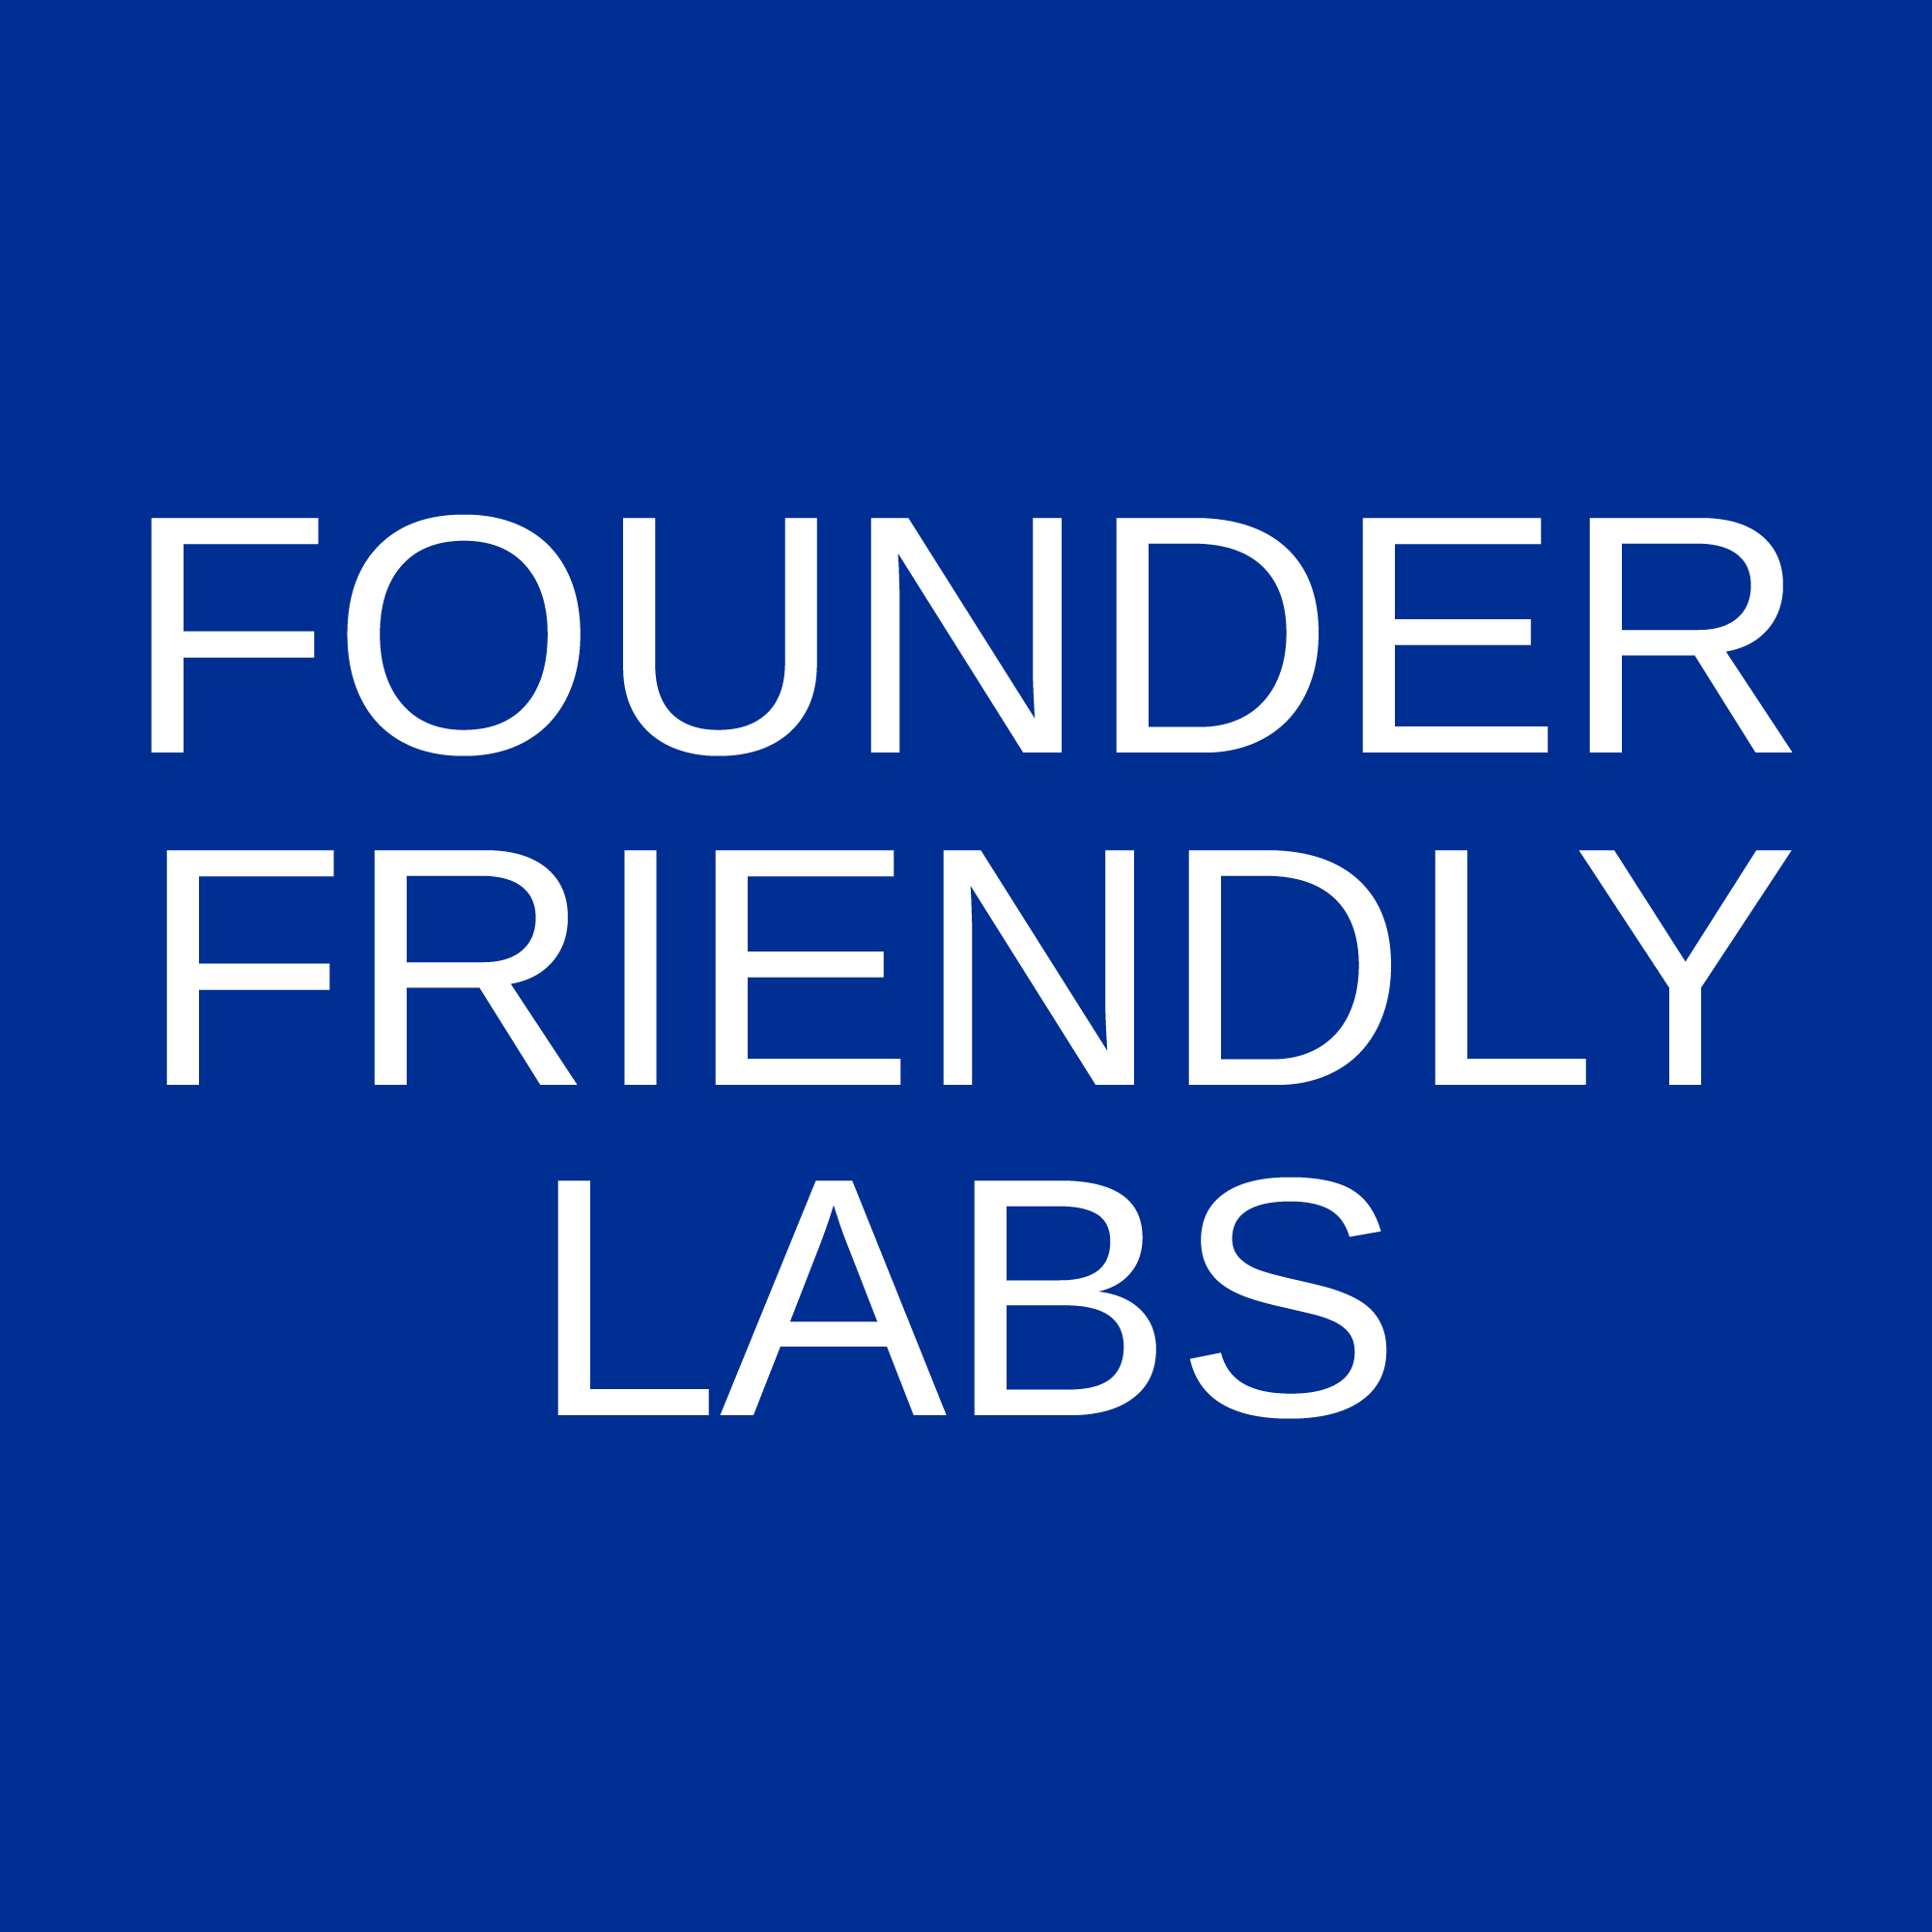 Founder Friendly Labs